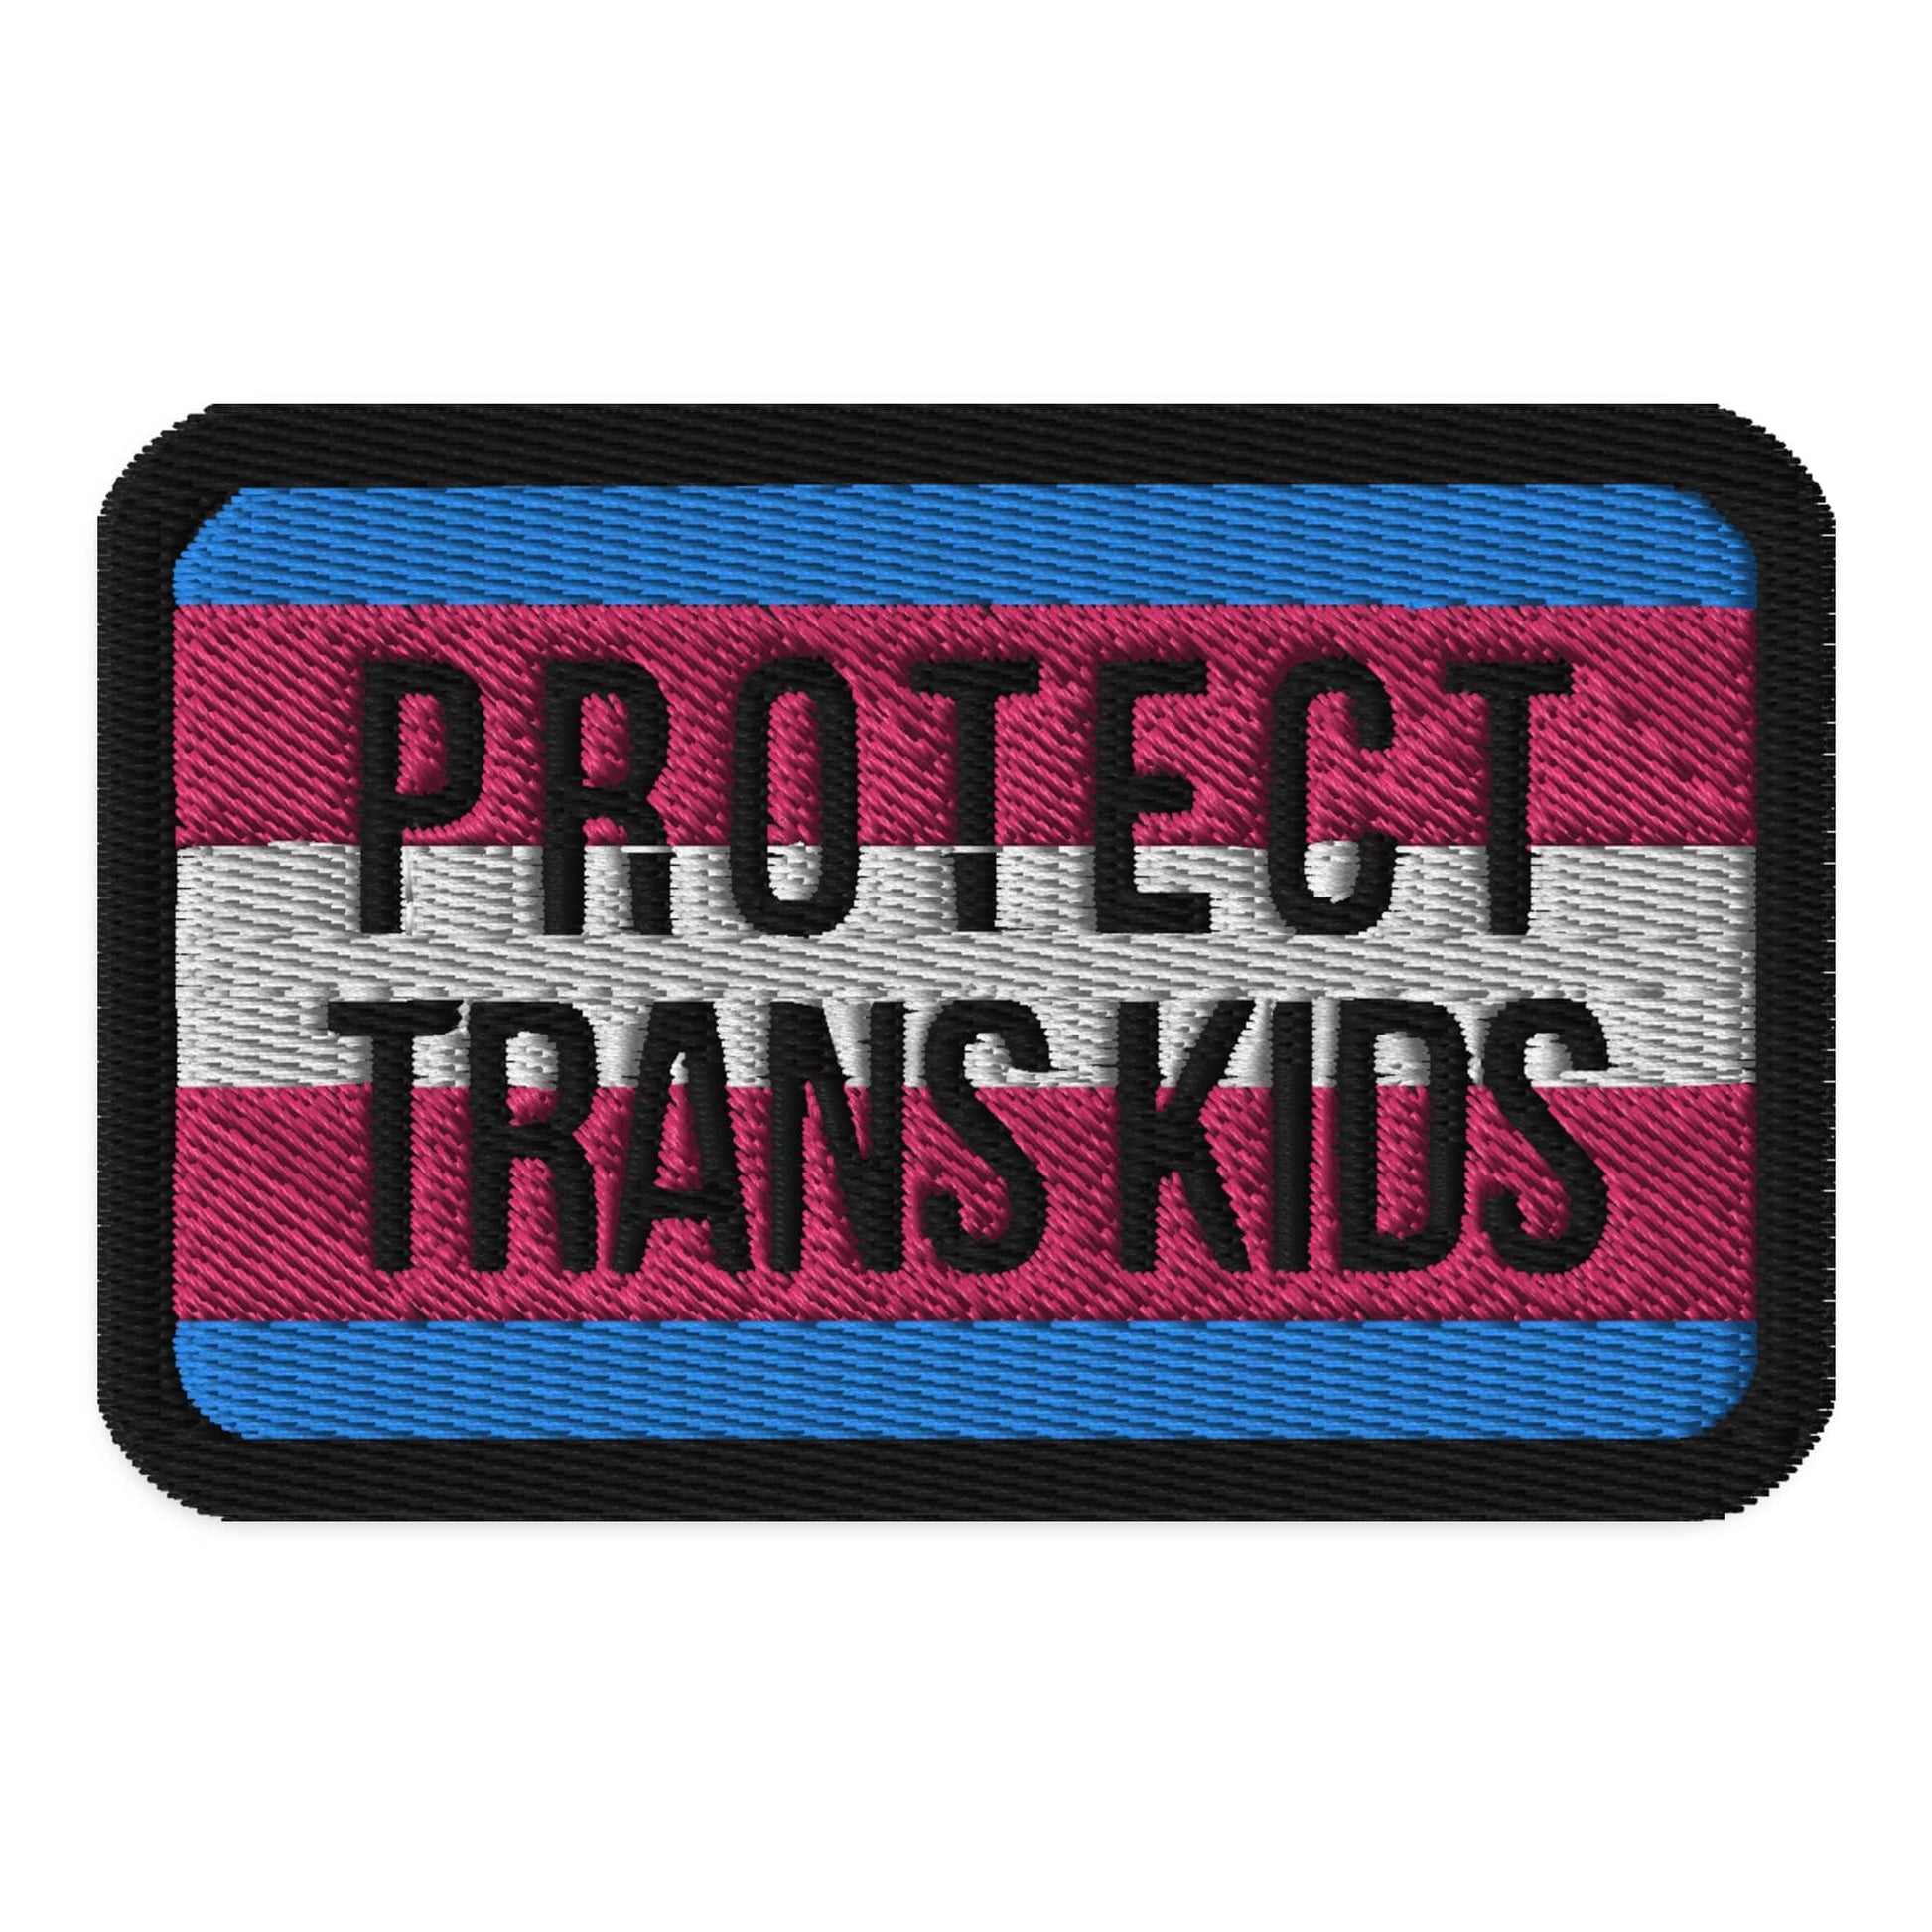 Protect Trans Kids Embroidered patch - Rose Gold Co. Shop